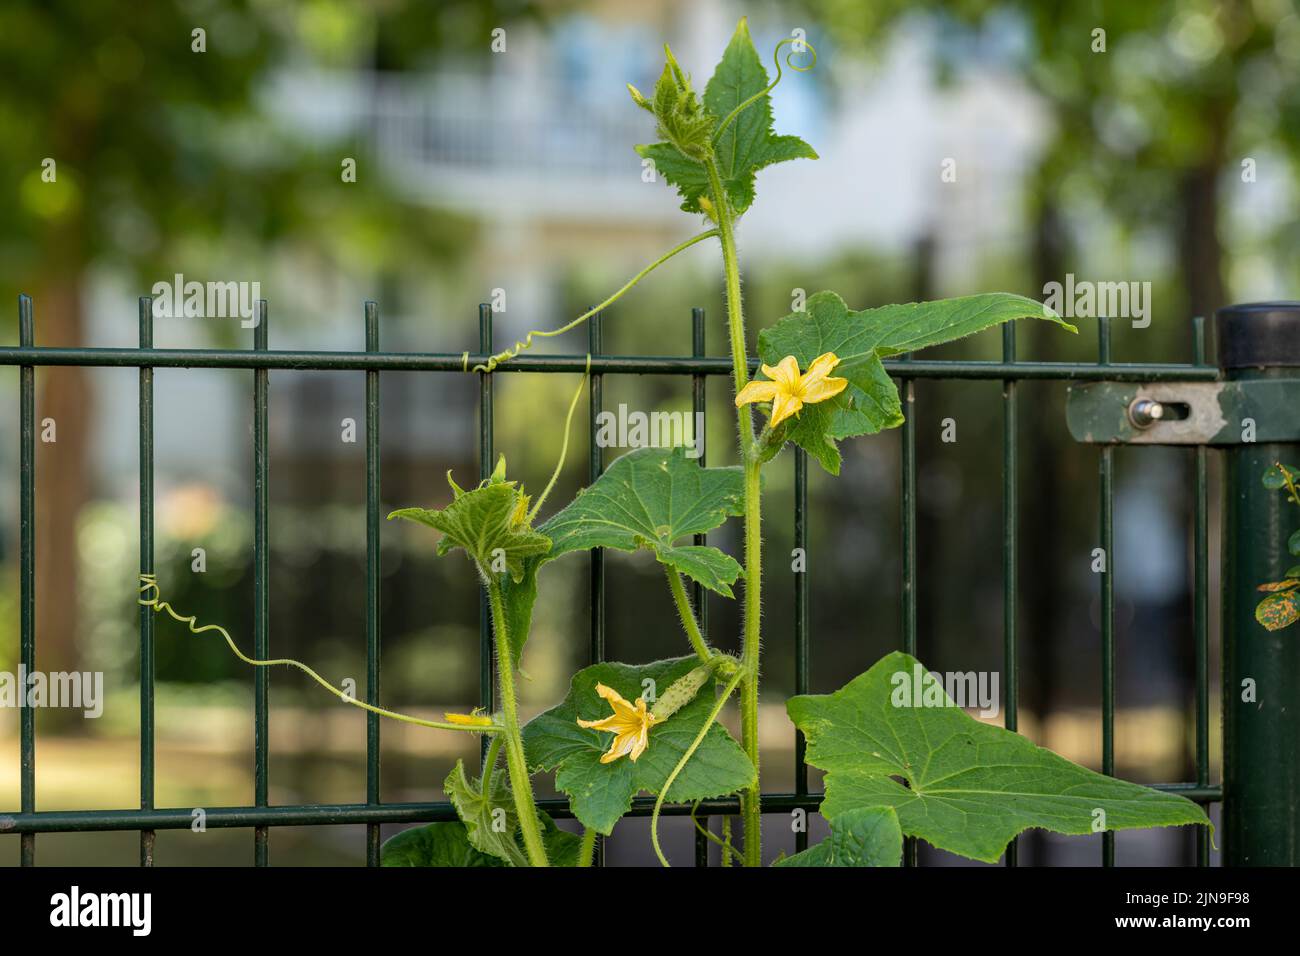 Cucumber plant with tendrils attached to the fence in the city garden Stock Photo